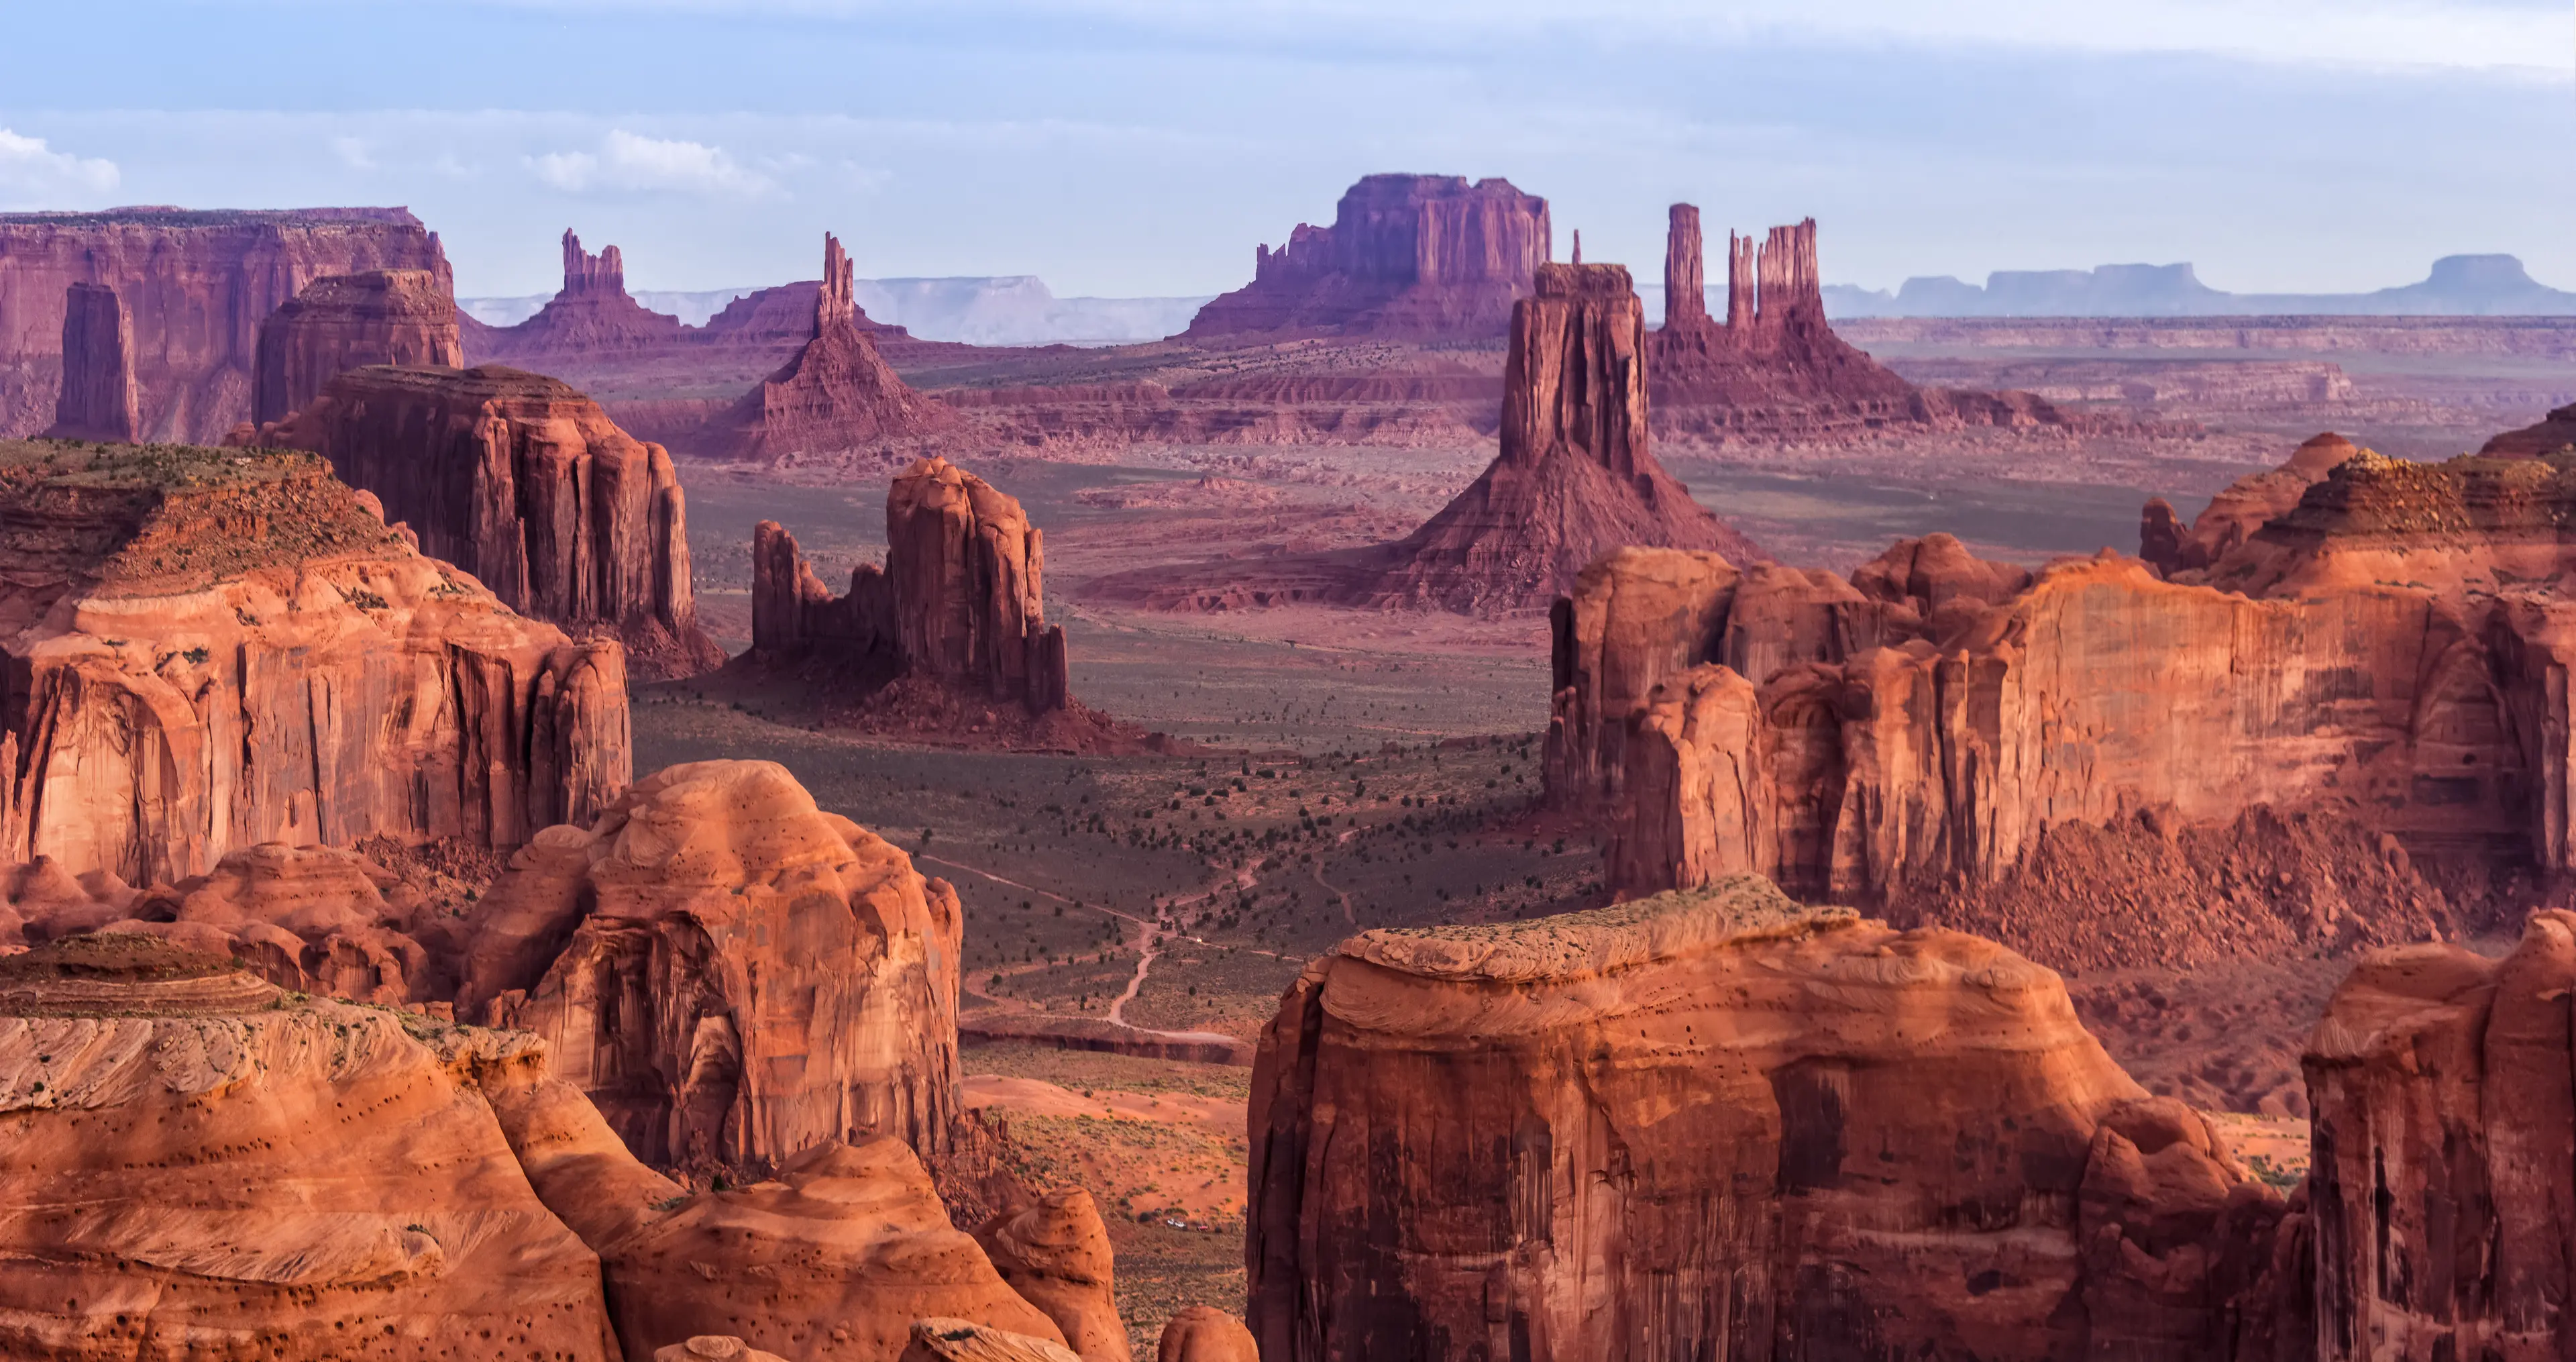 Solo 2-Day Local Outdoor Adventure at Monument Valley Tribal Park